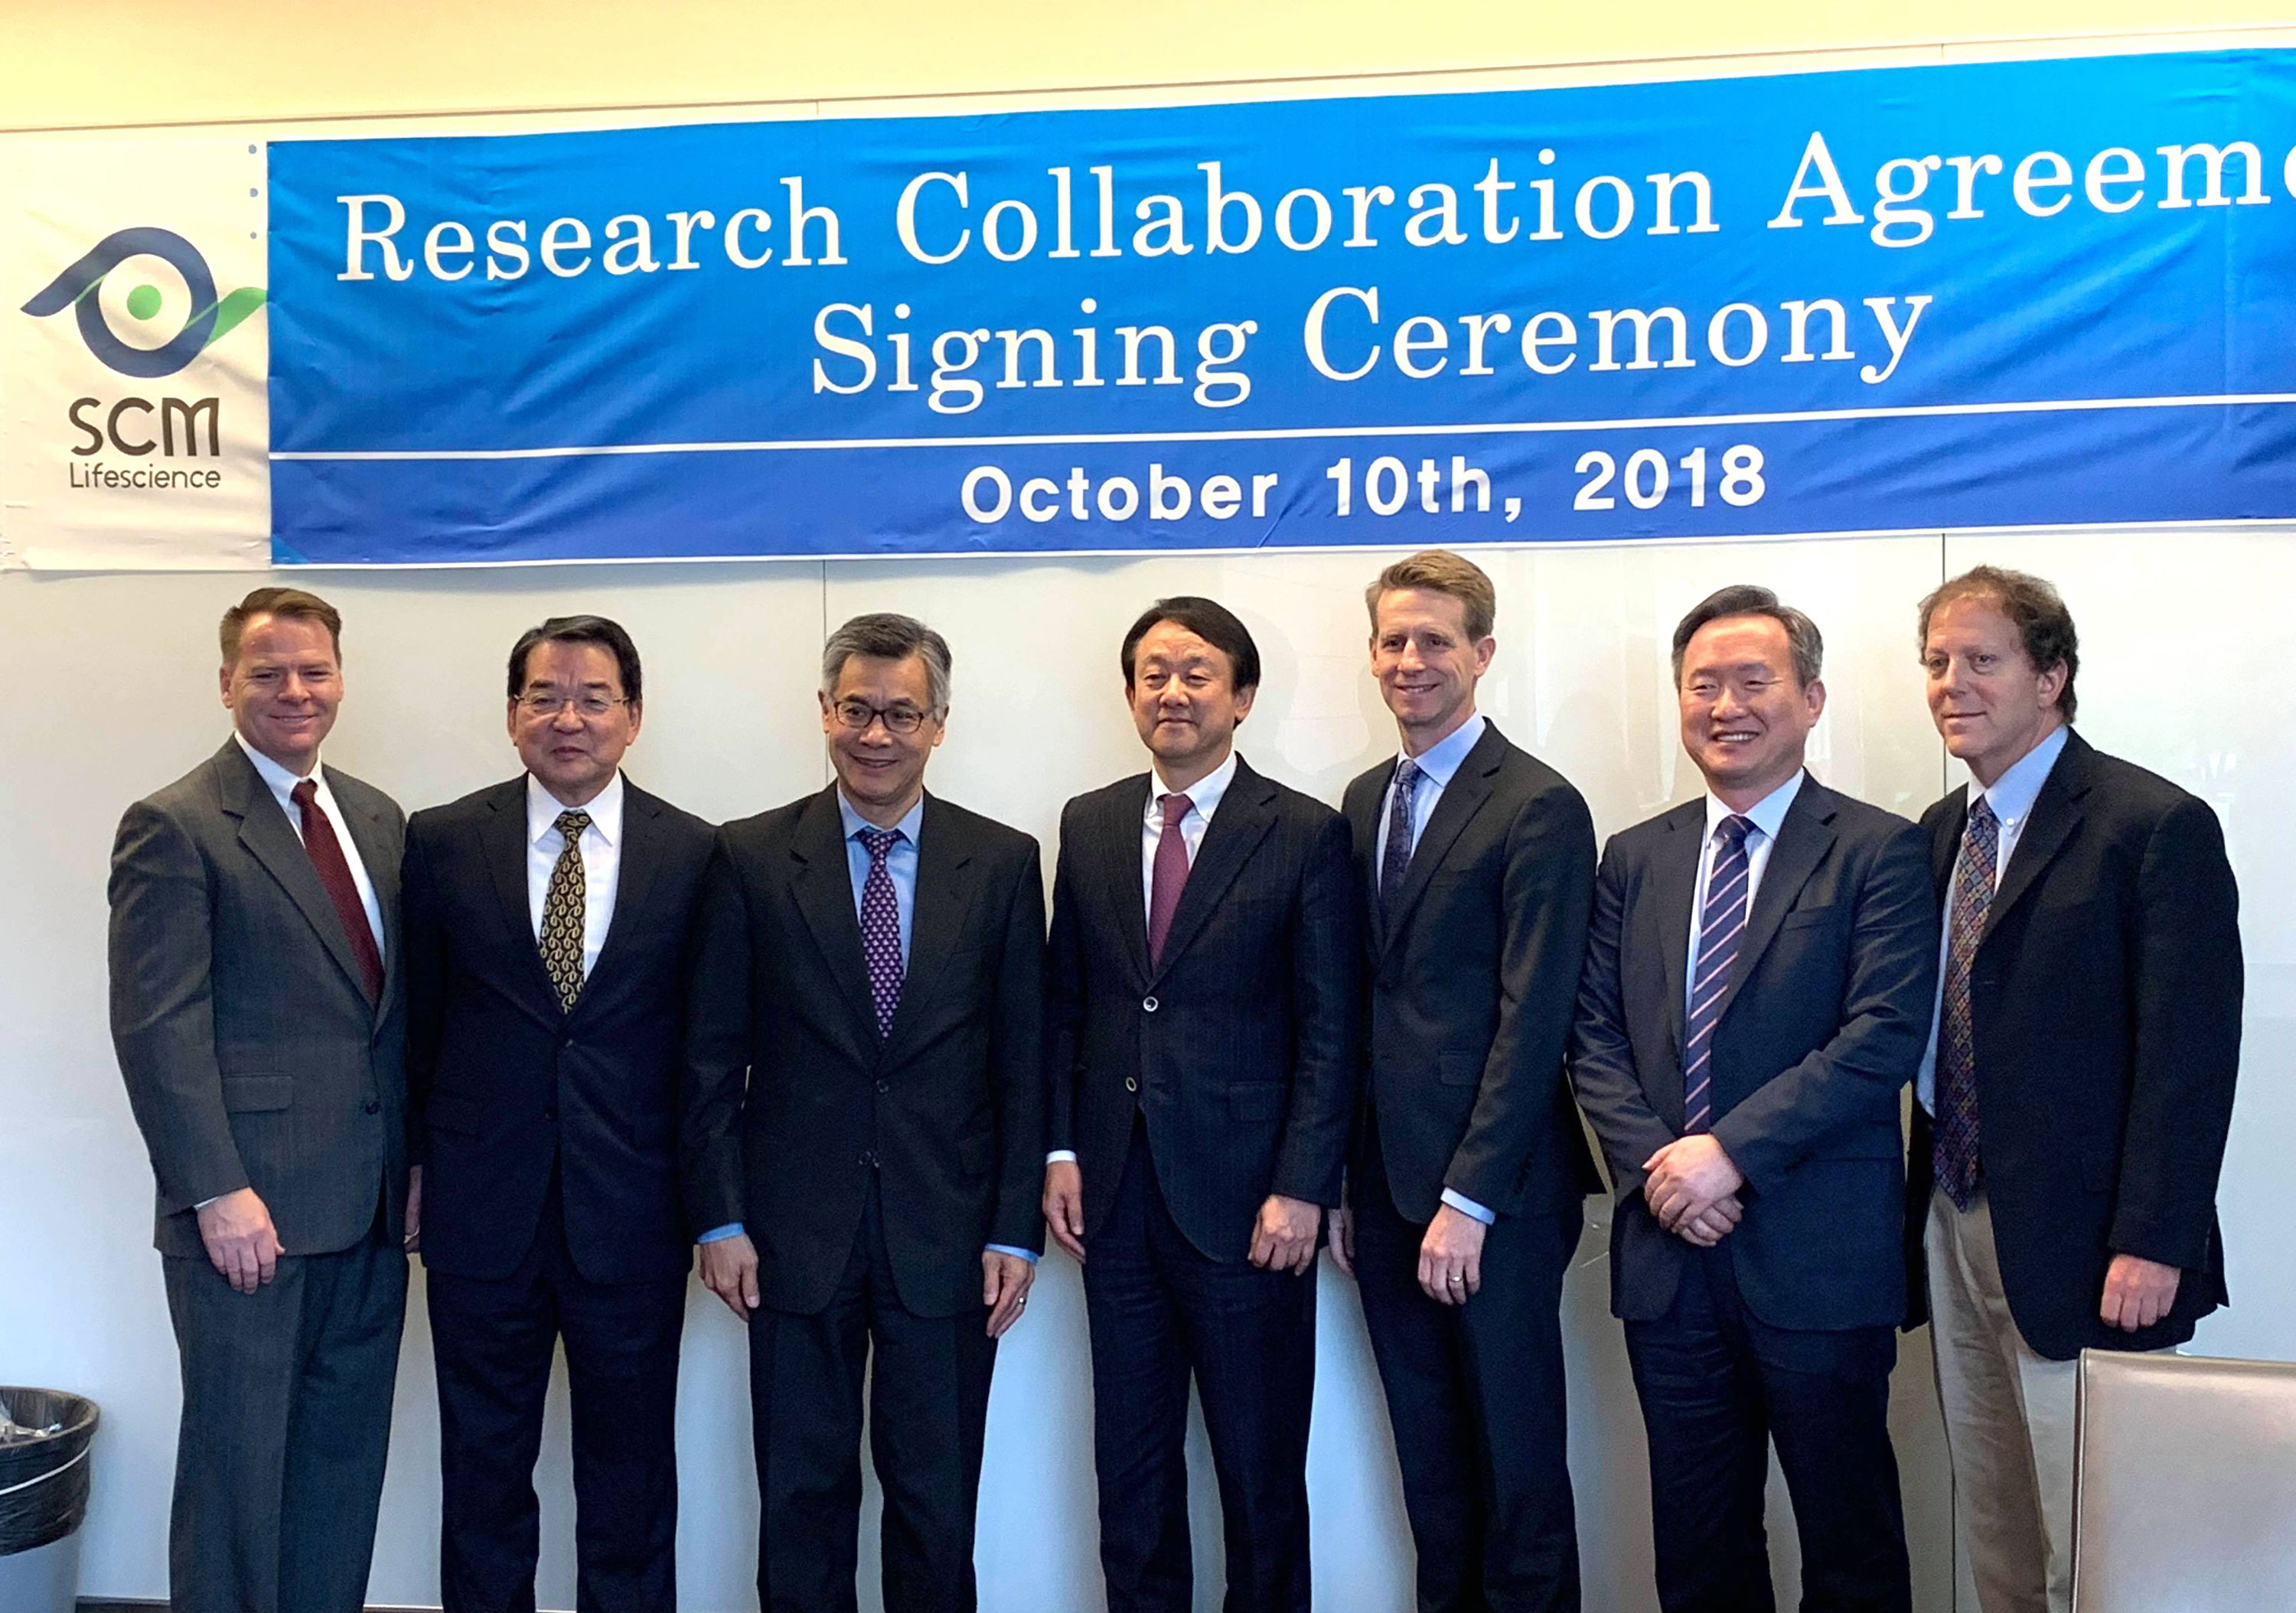 Research Collaboration Agreement Signing Ceremony 2018 group in front of sign